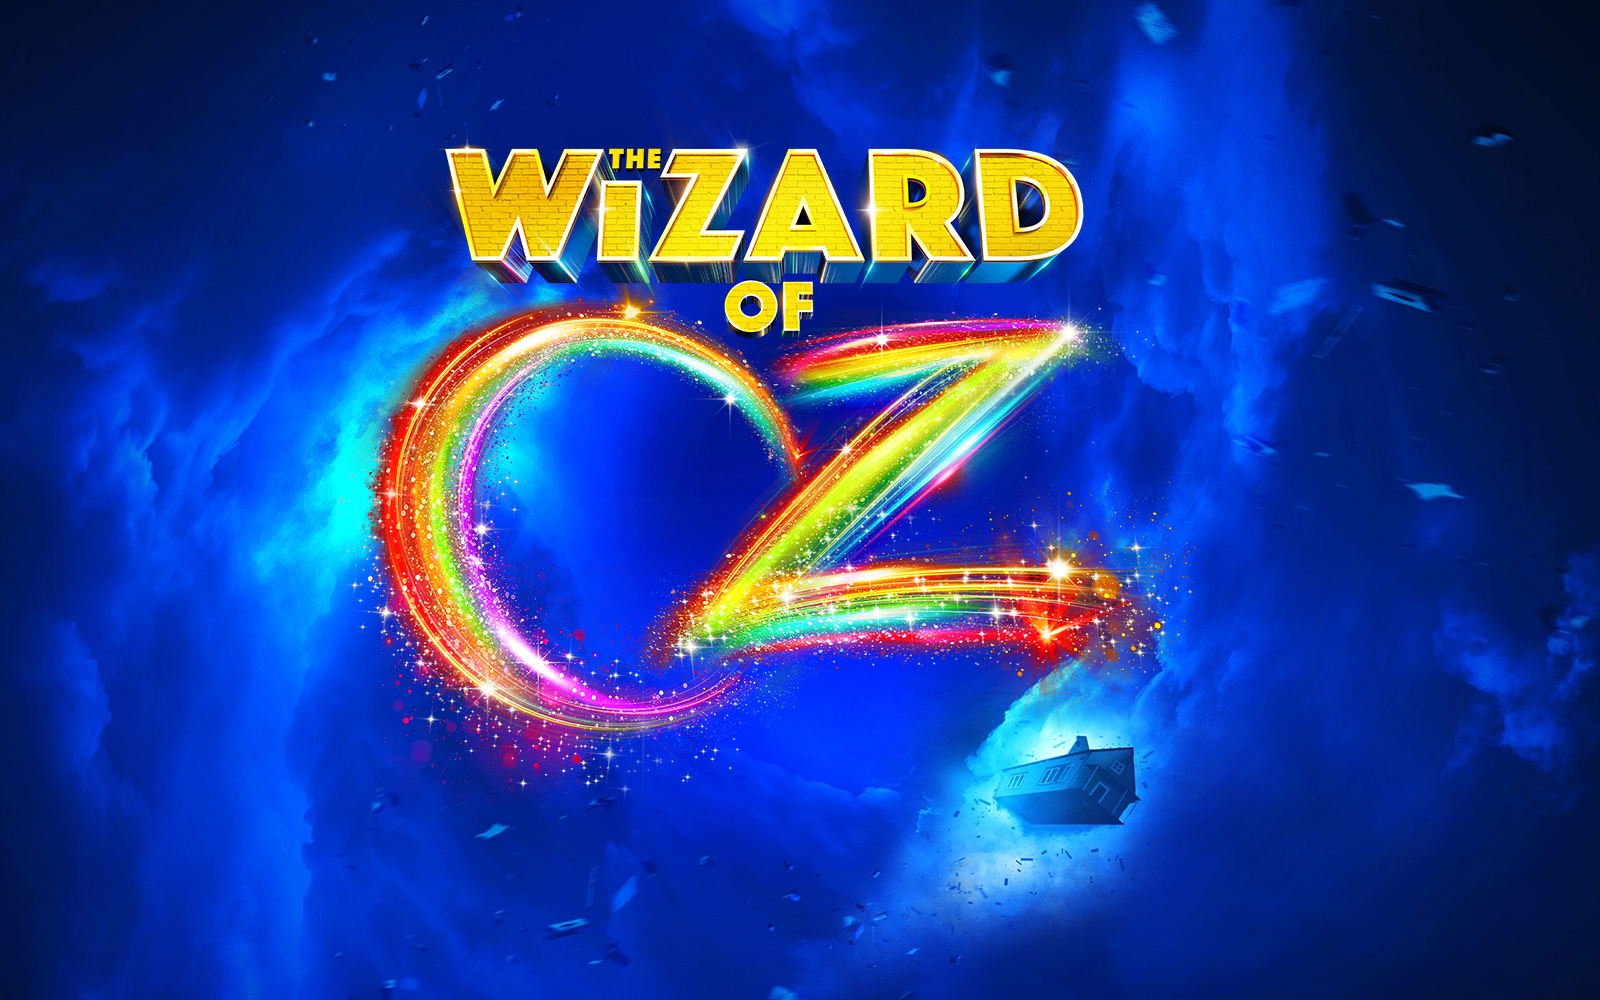 Image of The Wizard of Oz